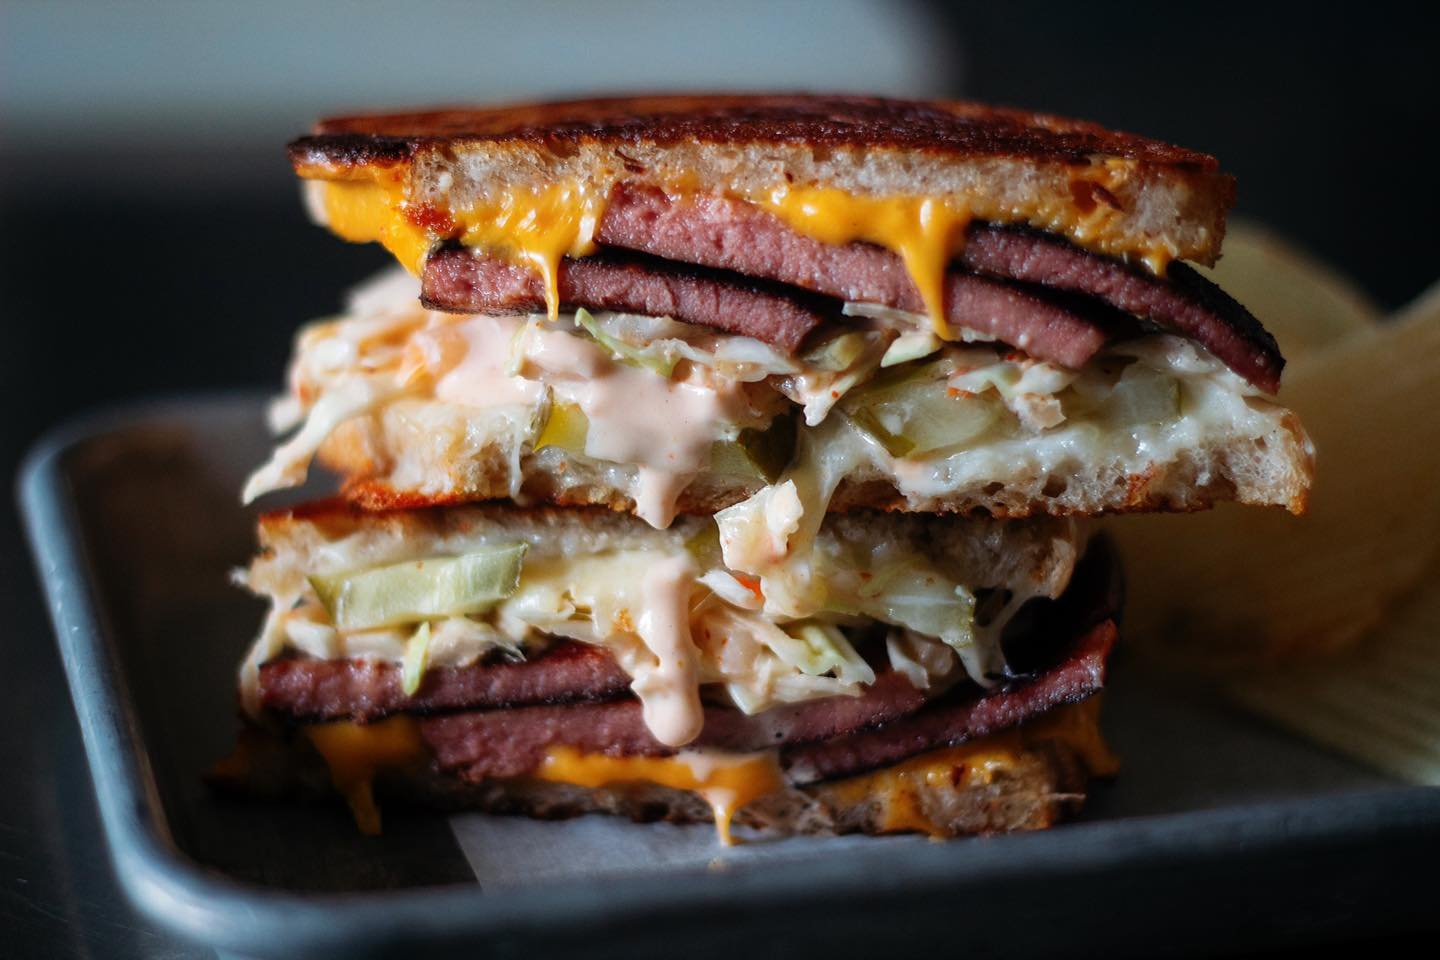 New addition to our regular menu, available every day! The &ldquo;Fried Balogna Reuben,&rdquo; or as I like to mentally refer to it, &ldquo;The Malcolm&rsquo;s Gotta Do What Malcolm&rsquo;s Gotta Do.&rdquo; 

Thick-sliced, hand-cut, factory-to-table 